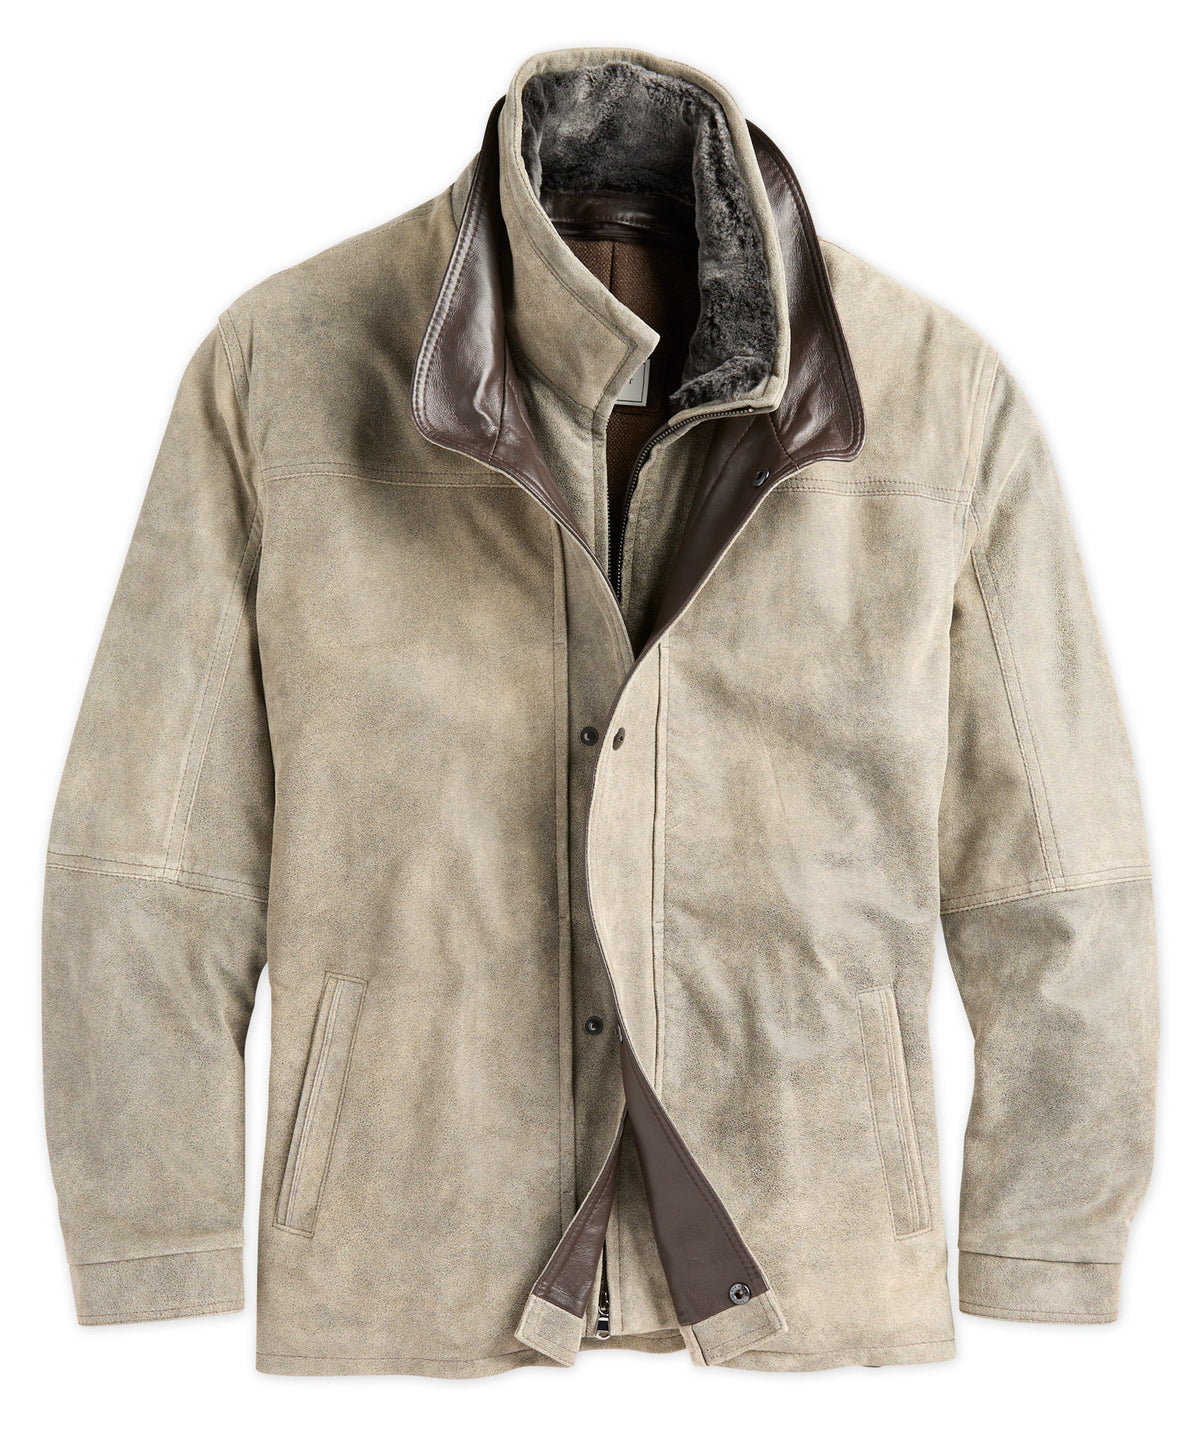 Diego Rustic Leather Jacket